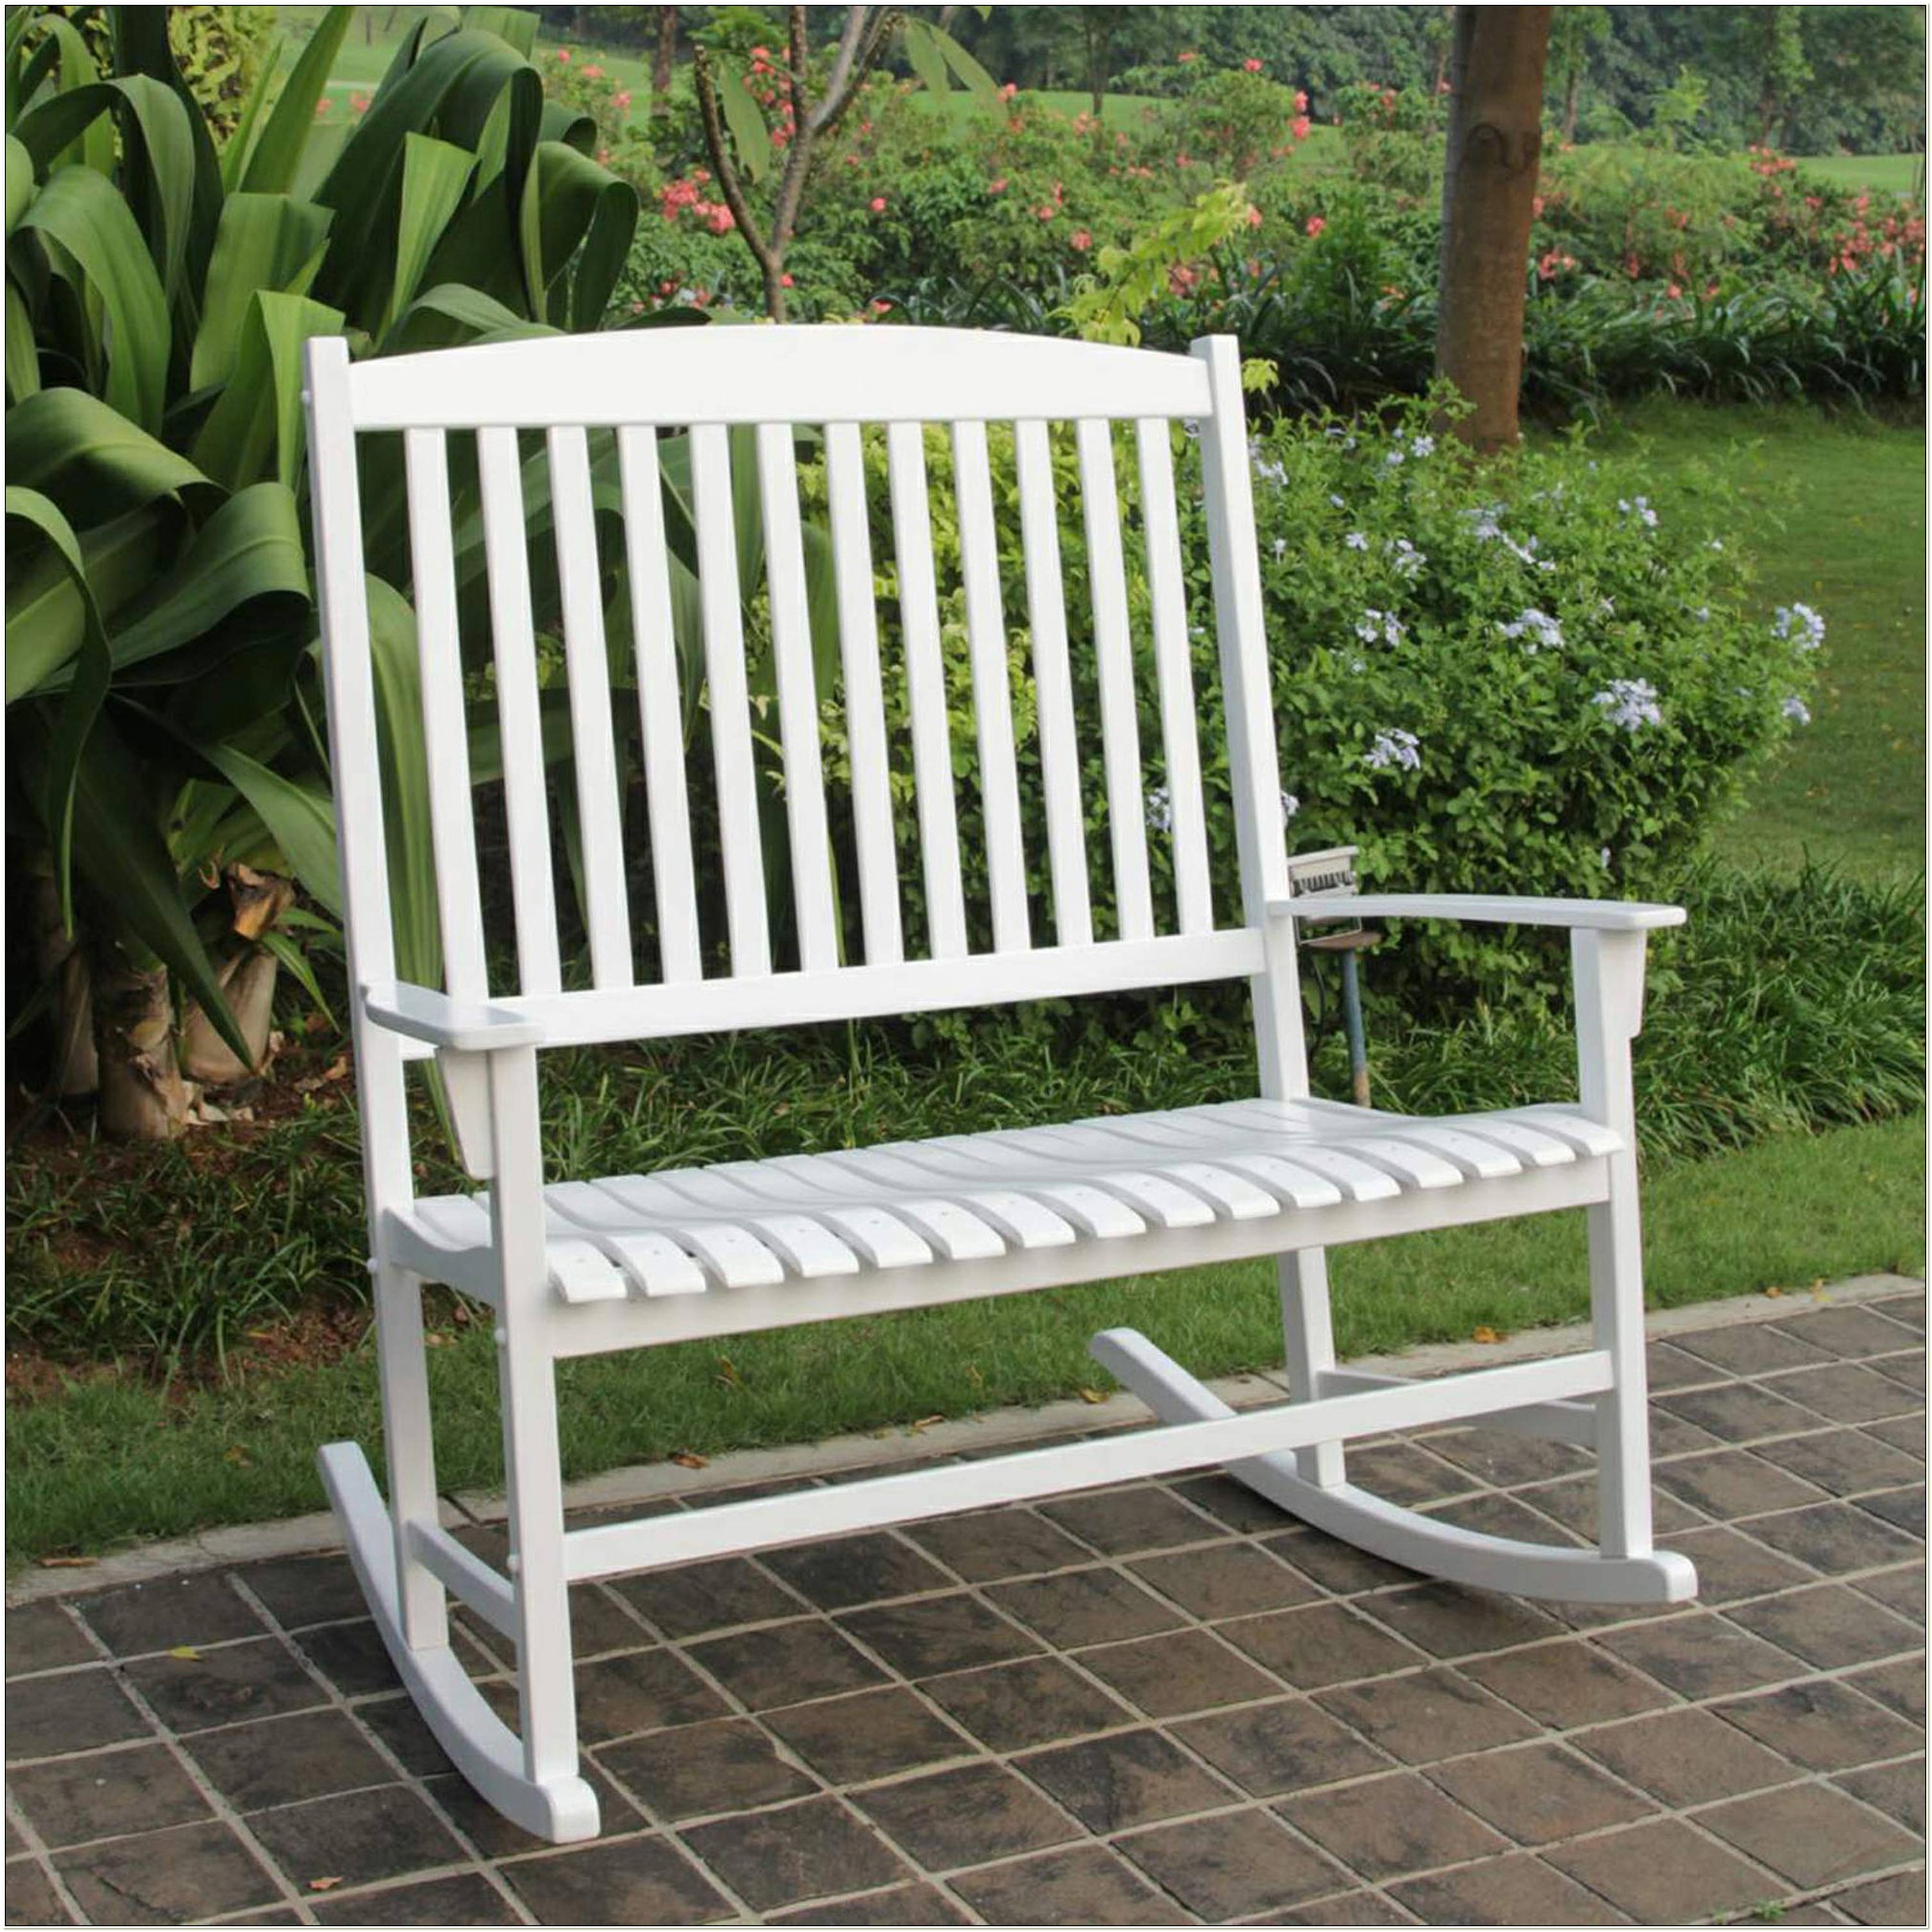 Cheap White Outdoor Rocking Chairs - Chairs : Home Decorating Ideas #